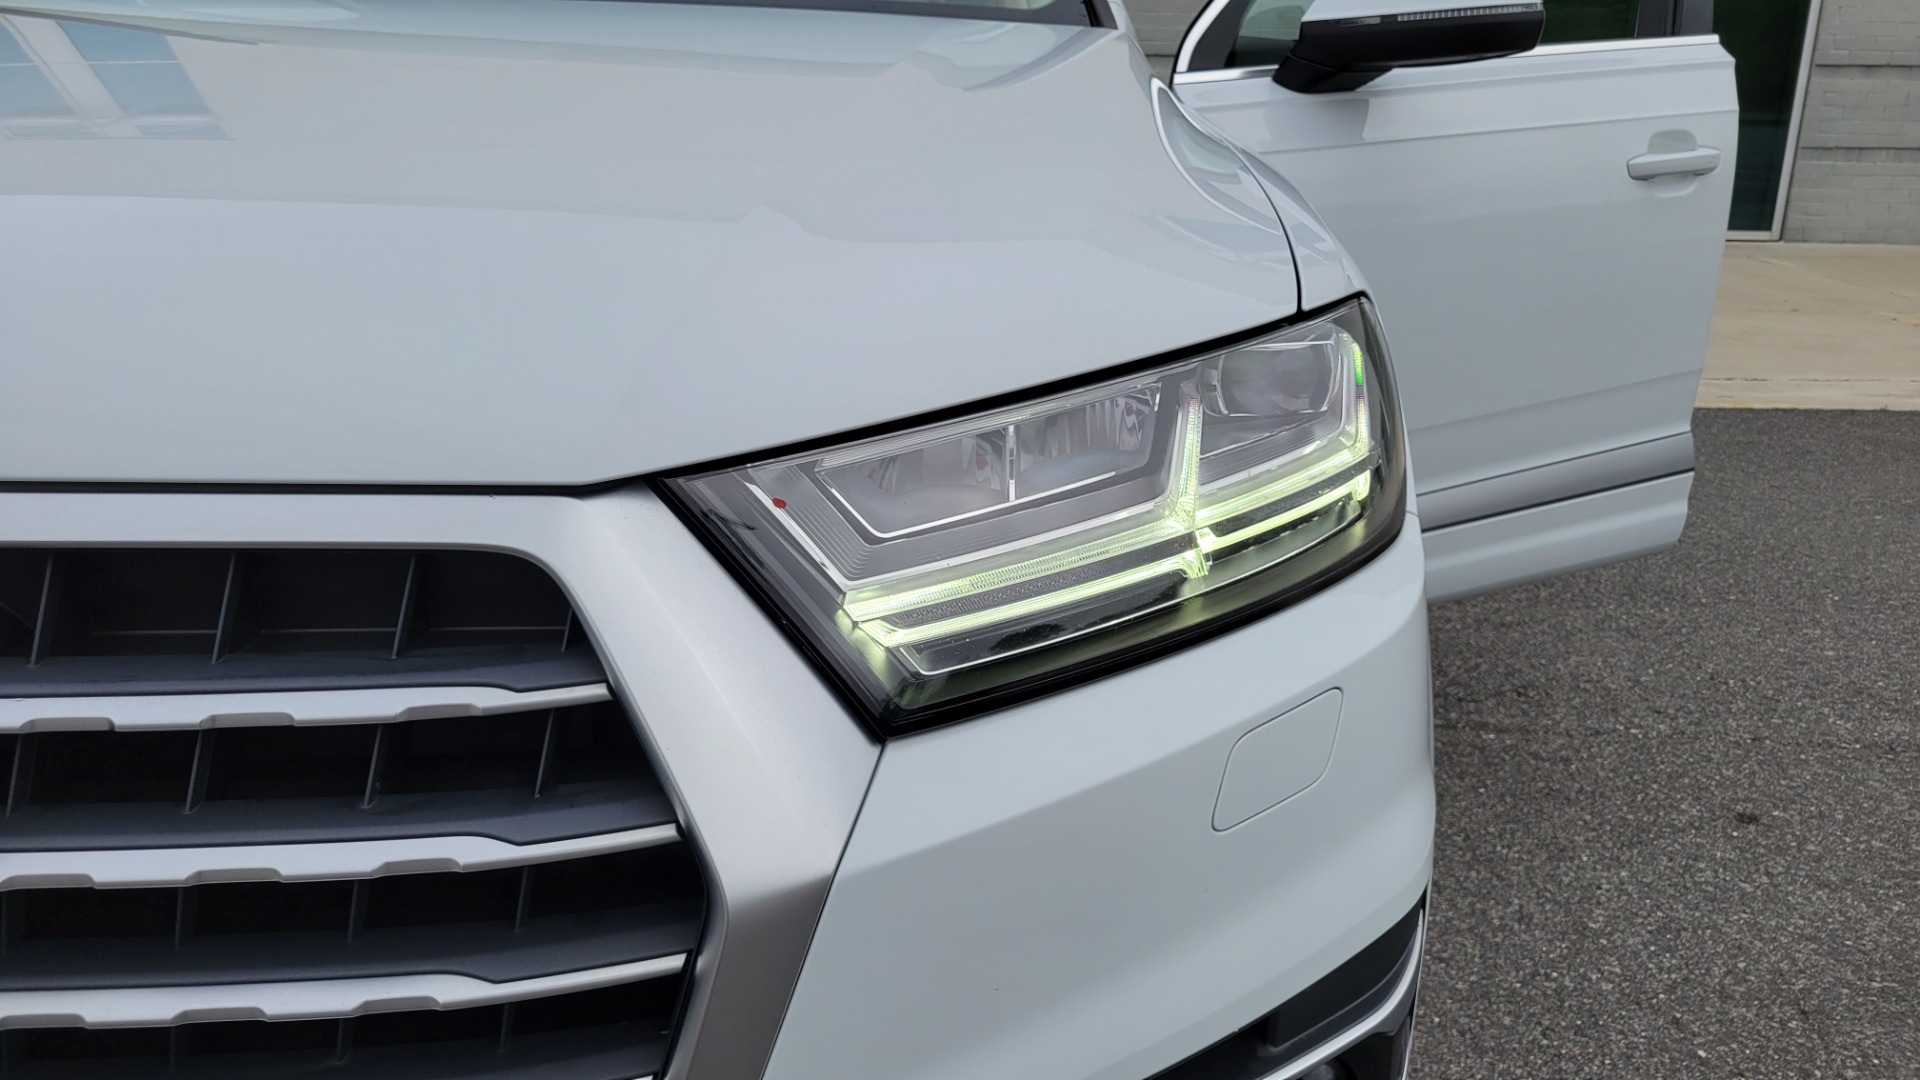 Used 2019 Audi Q7 PRESTIGE / CONV PKG / BOSE / HUD / CLD WTHR / TOWING / REARVIEW for sale $50,295 at Formula Imports in Charlotte NC 28227 30